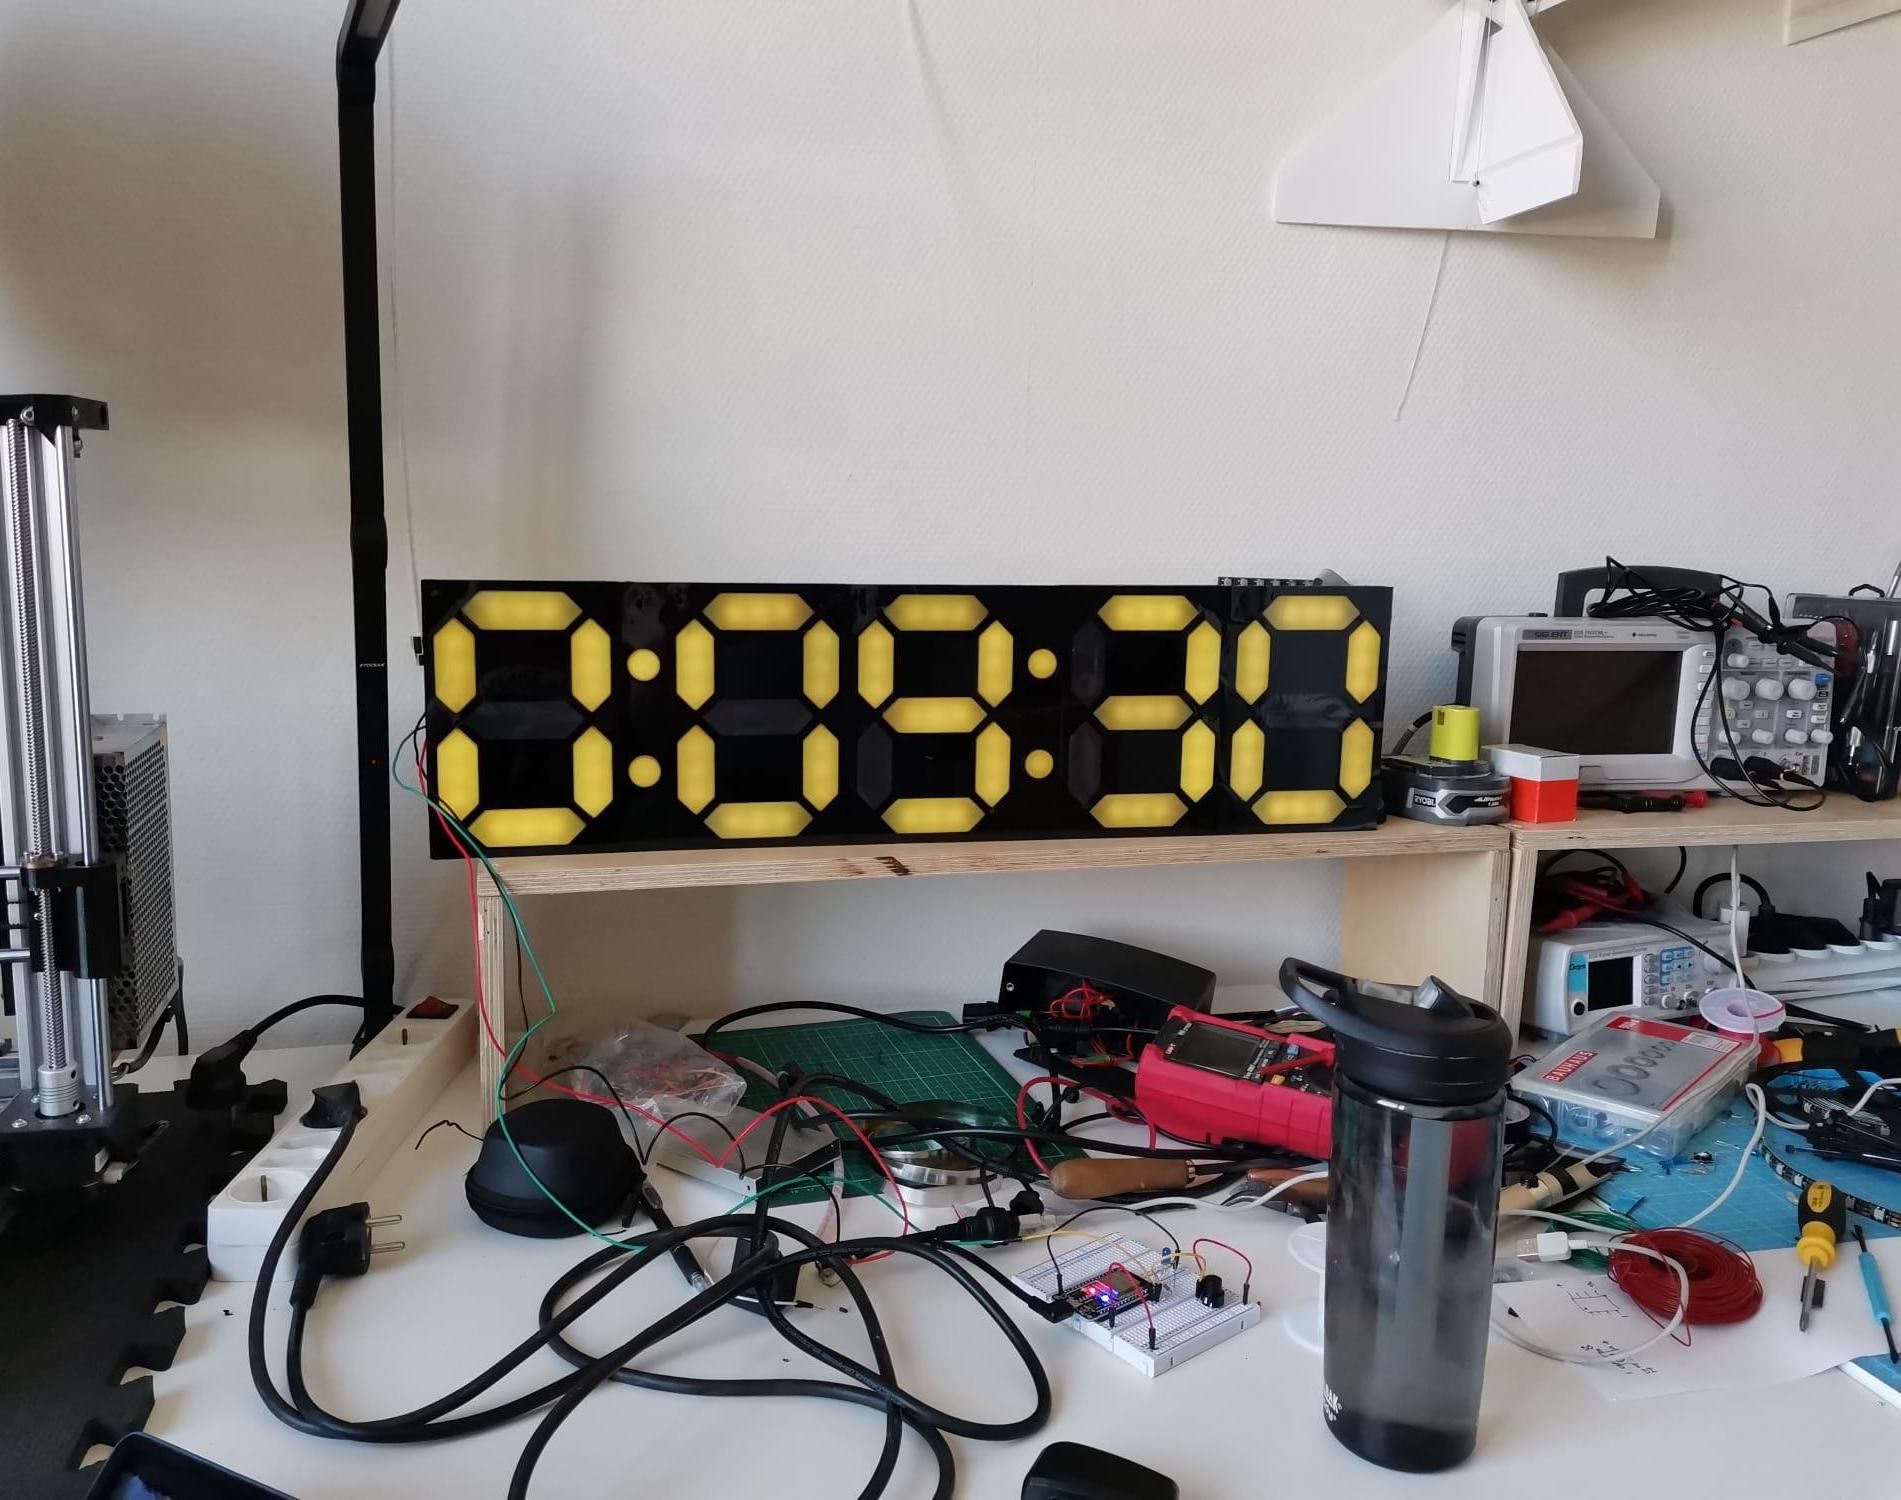 ESP32 Based TalkTimer for Conferences With Large 7-segment Displays and Web-interface